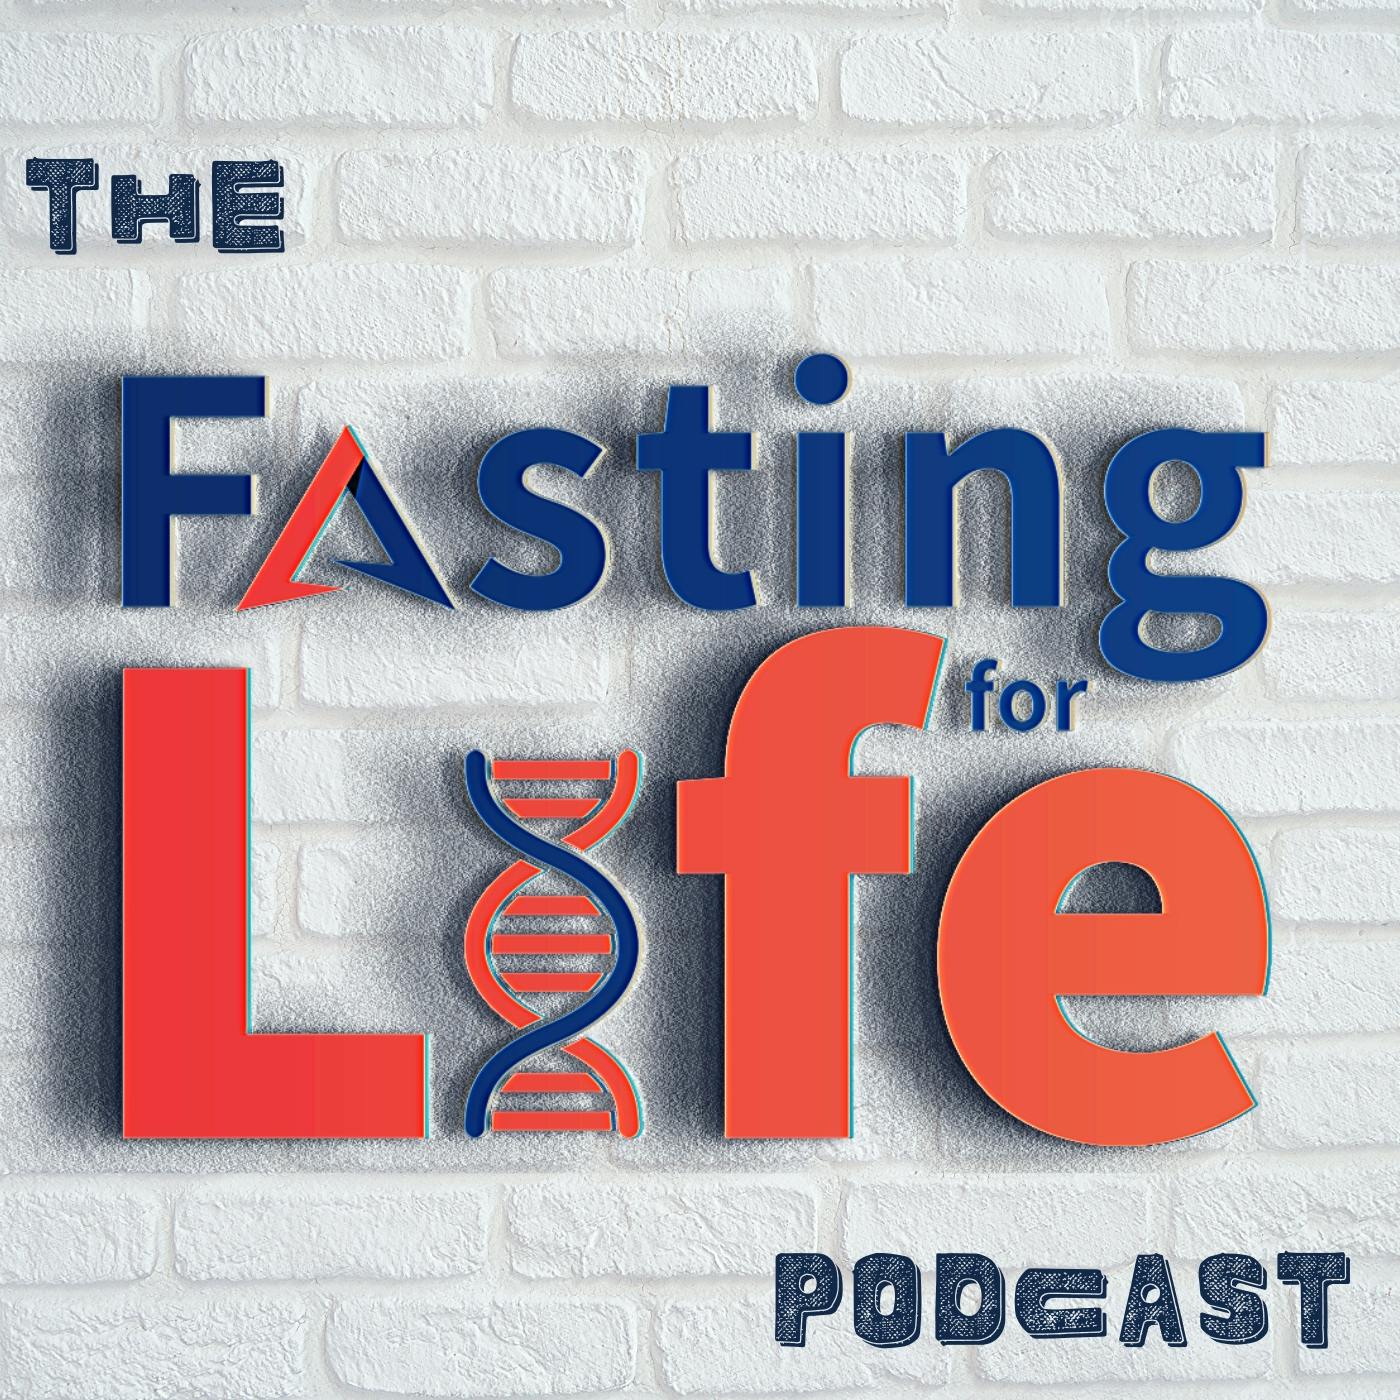 Ep. 202 - Does fasting increase hunger? | Do you have to cut carbs to burn fat using fasting? | Avoiding the “buffet effect” when breaking a fast & closing a nutrition window | Emotional eating, G